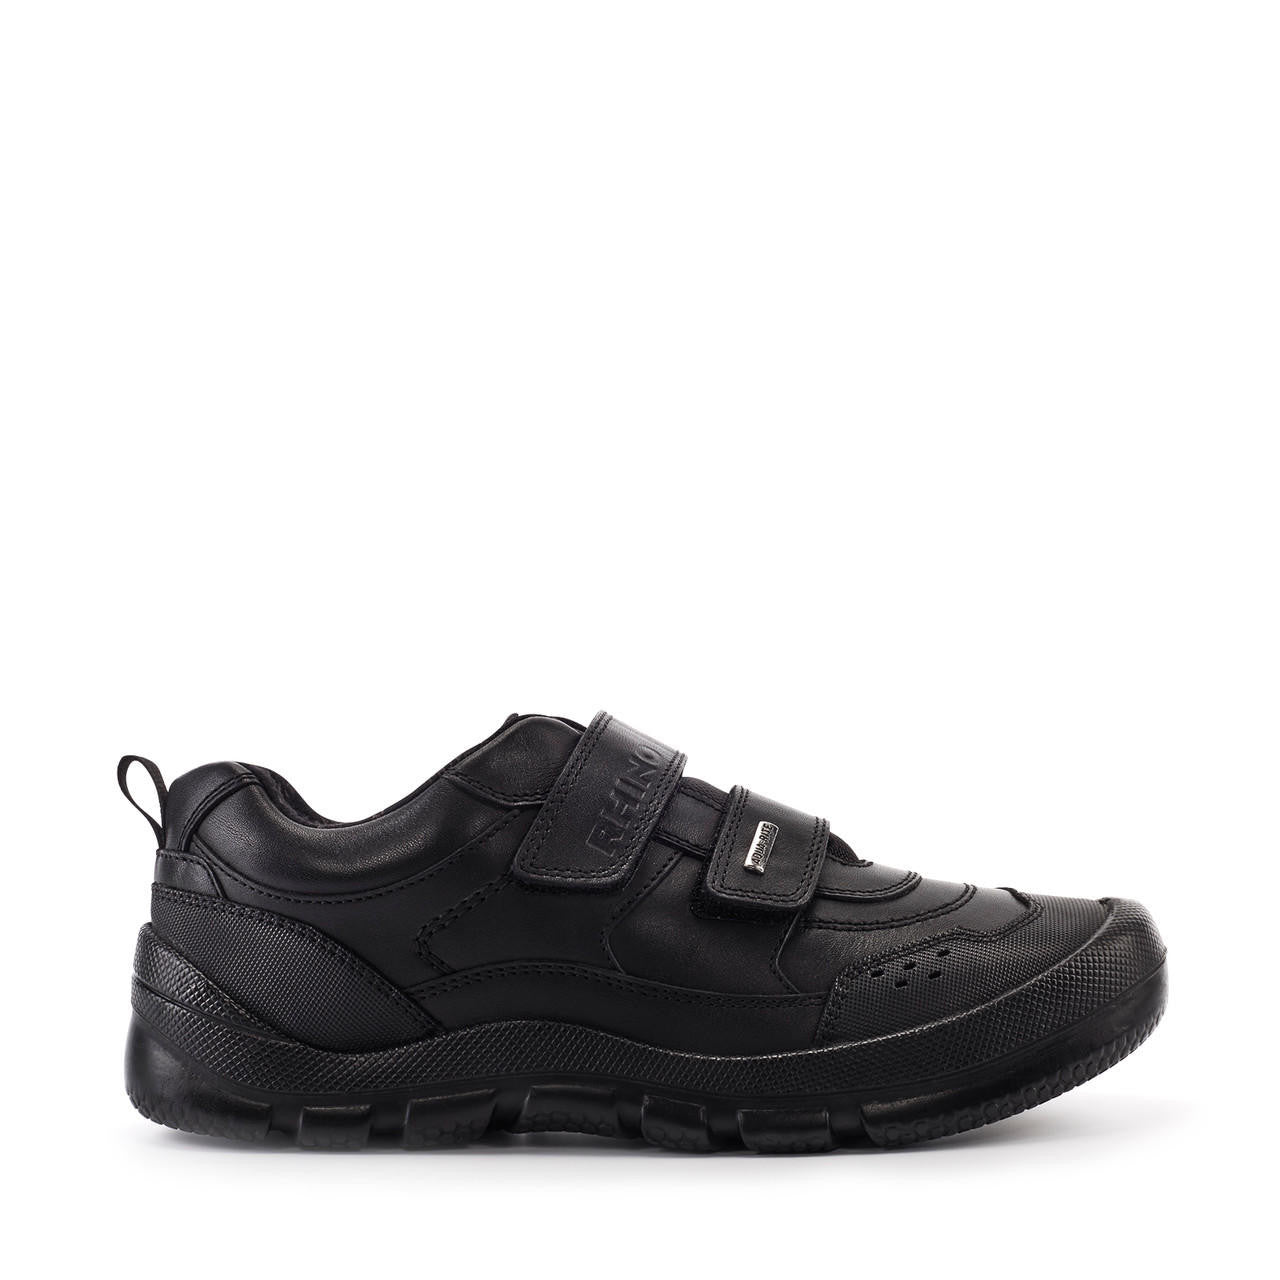 A boys waterproof school shoe by Start Rite, style Trooper, in black leather with double velcro fastening. Right side view.